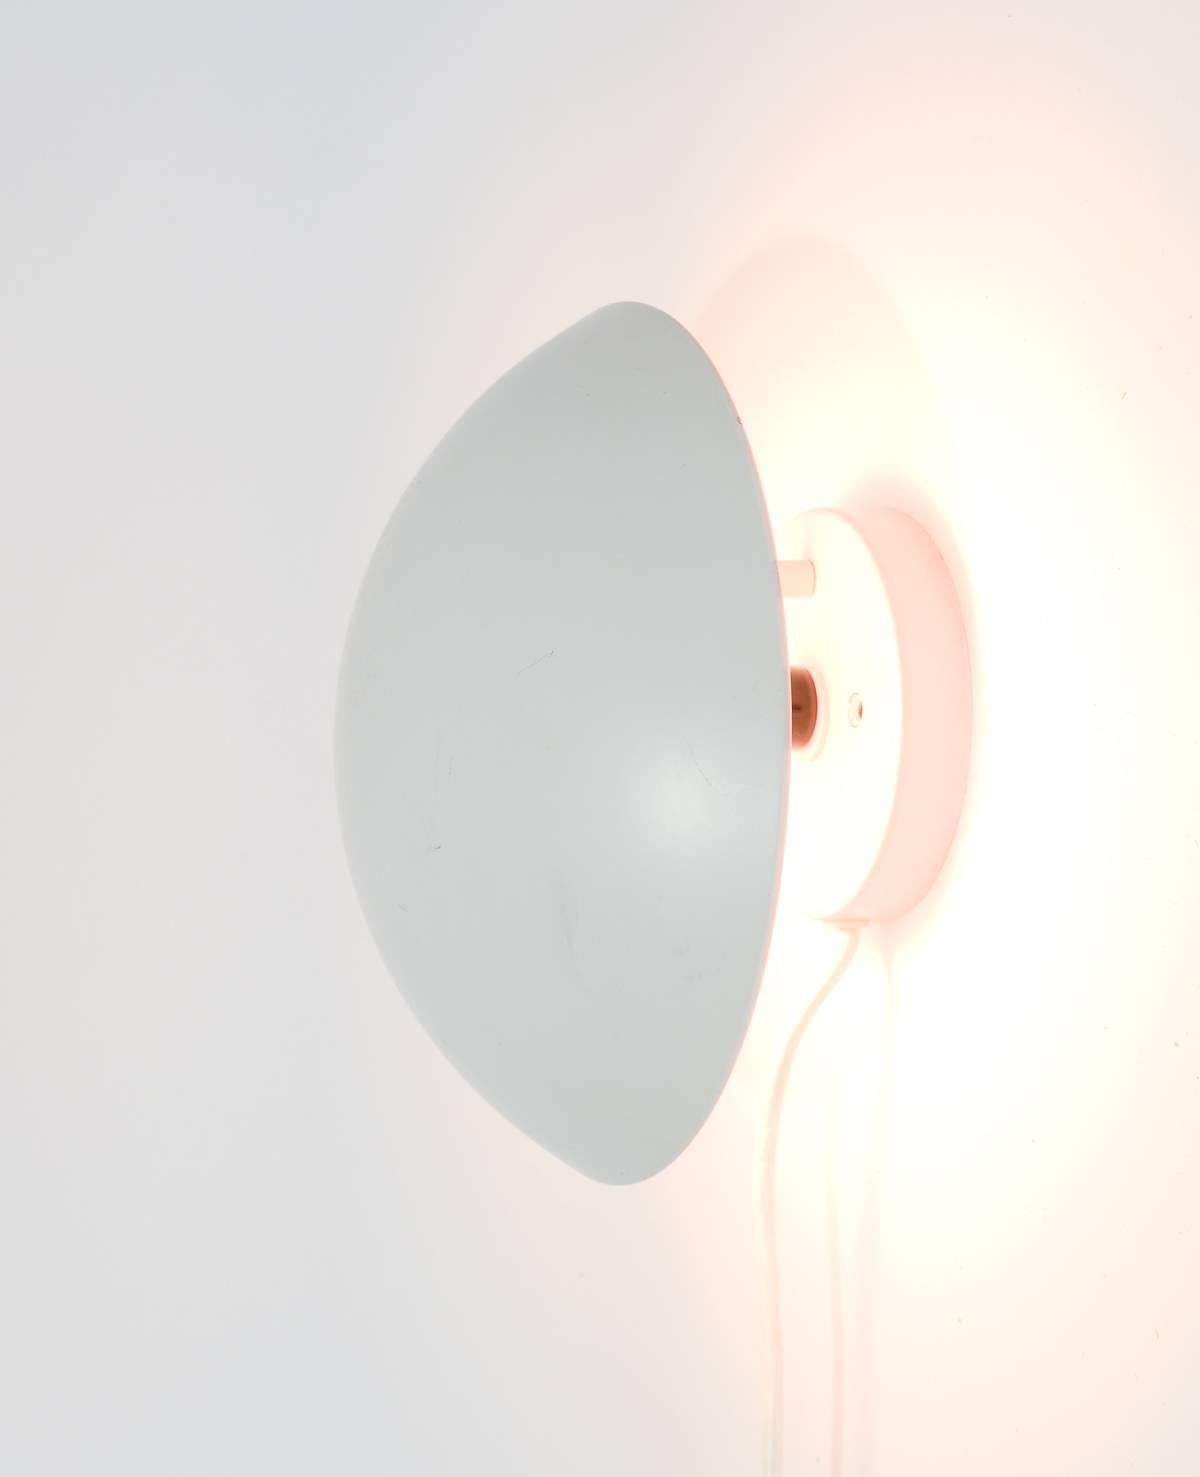 A pair of articulating P-Hat wall sconces by Poul Henningsen for Louis Poulsen. In arctic mat white with pink reflector interiors. A sophisticated wall lighting solution for home or office. Shade tilts from 5.5